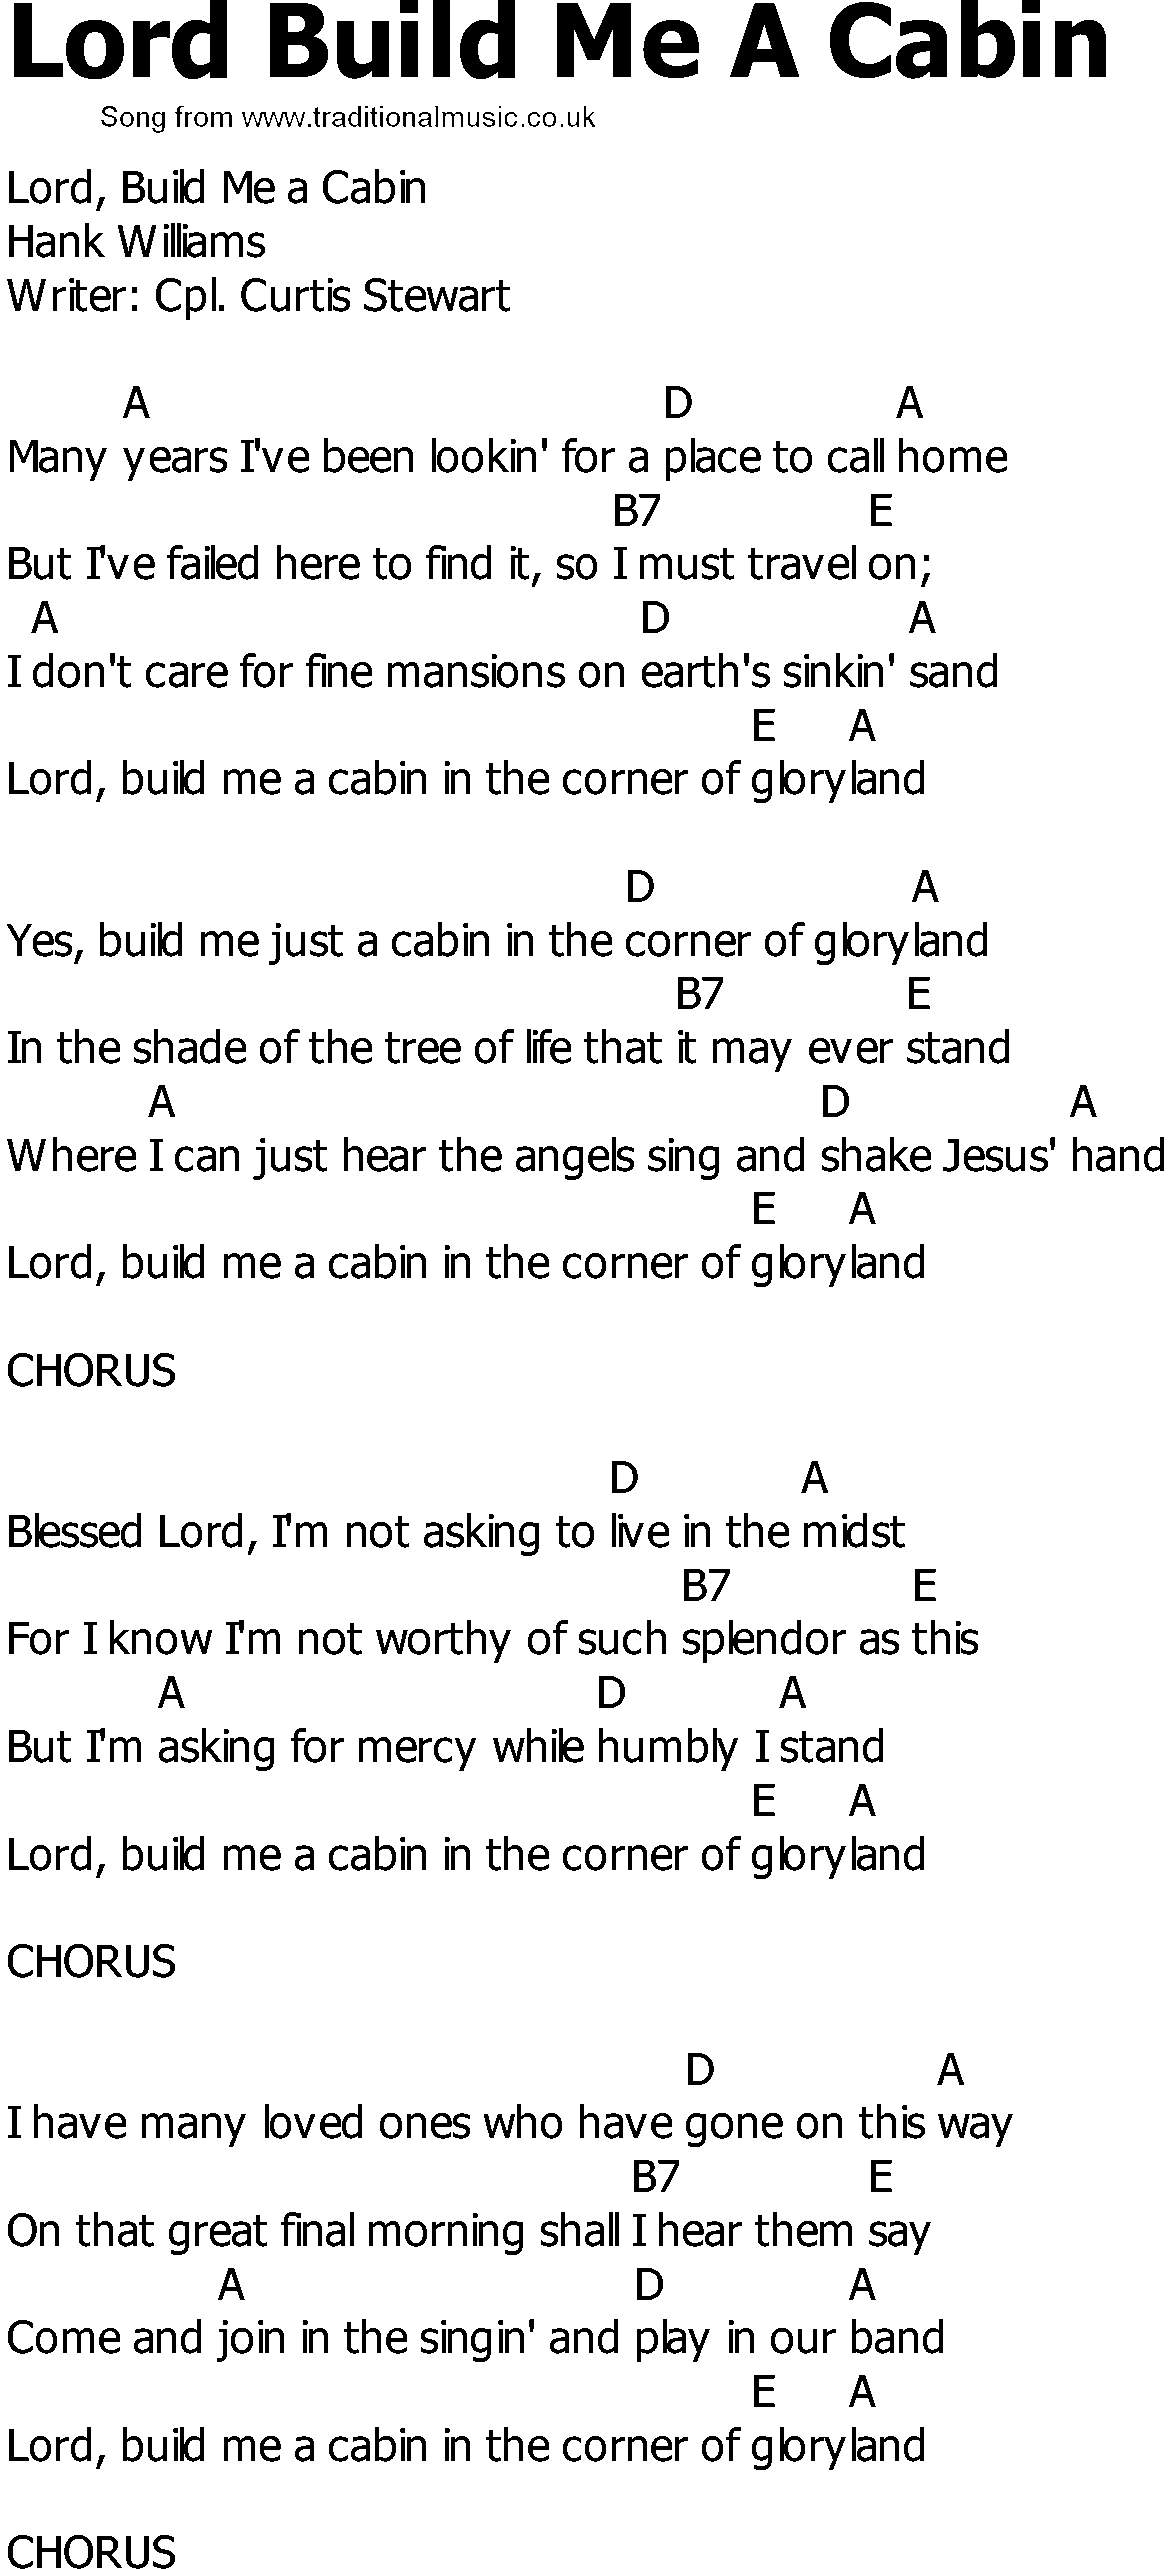 Old Country song lyrics with chords - Lord Build Me A Cabin